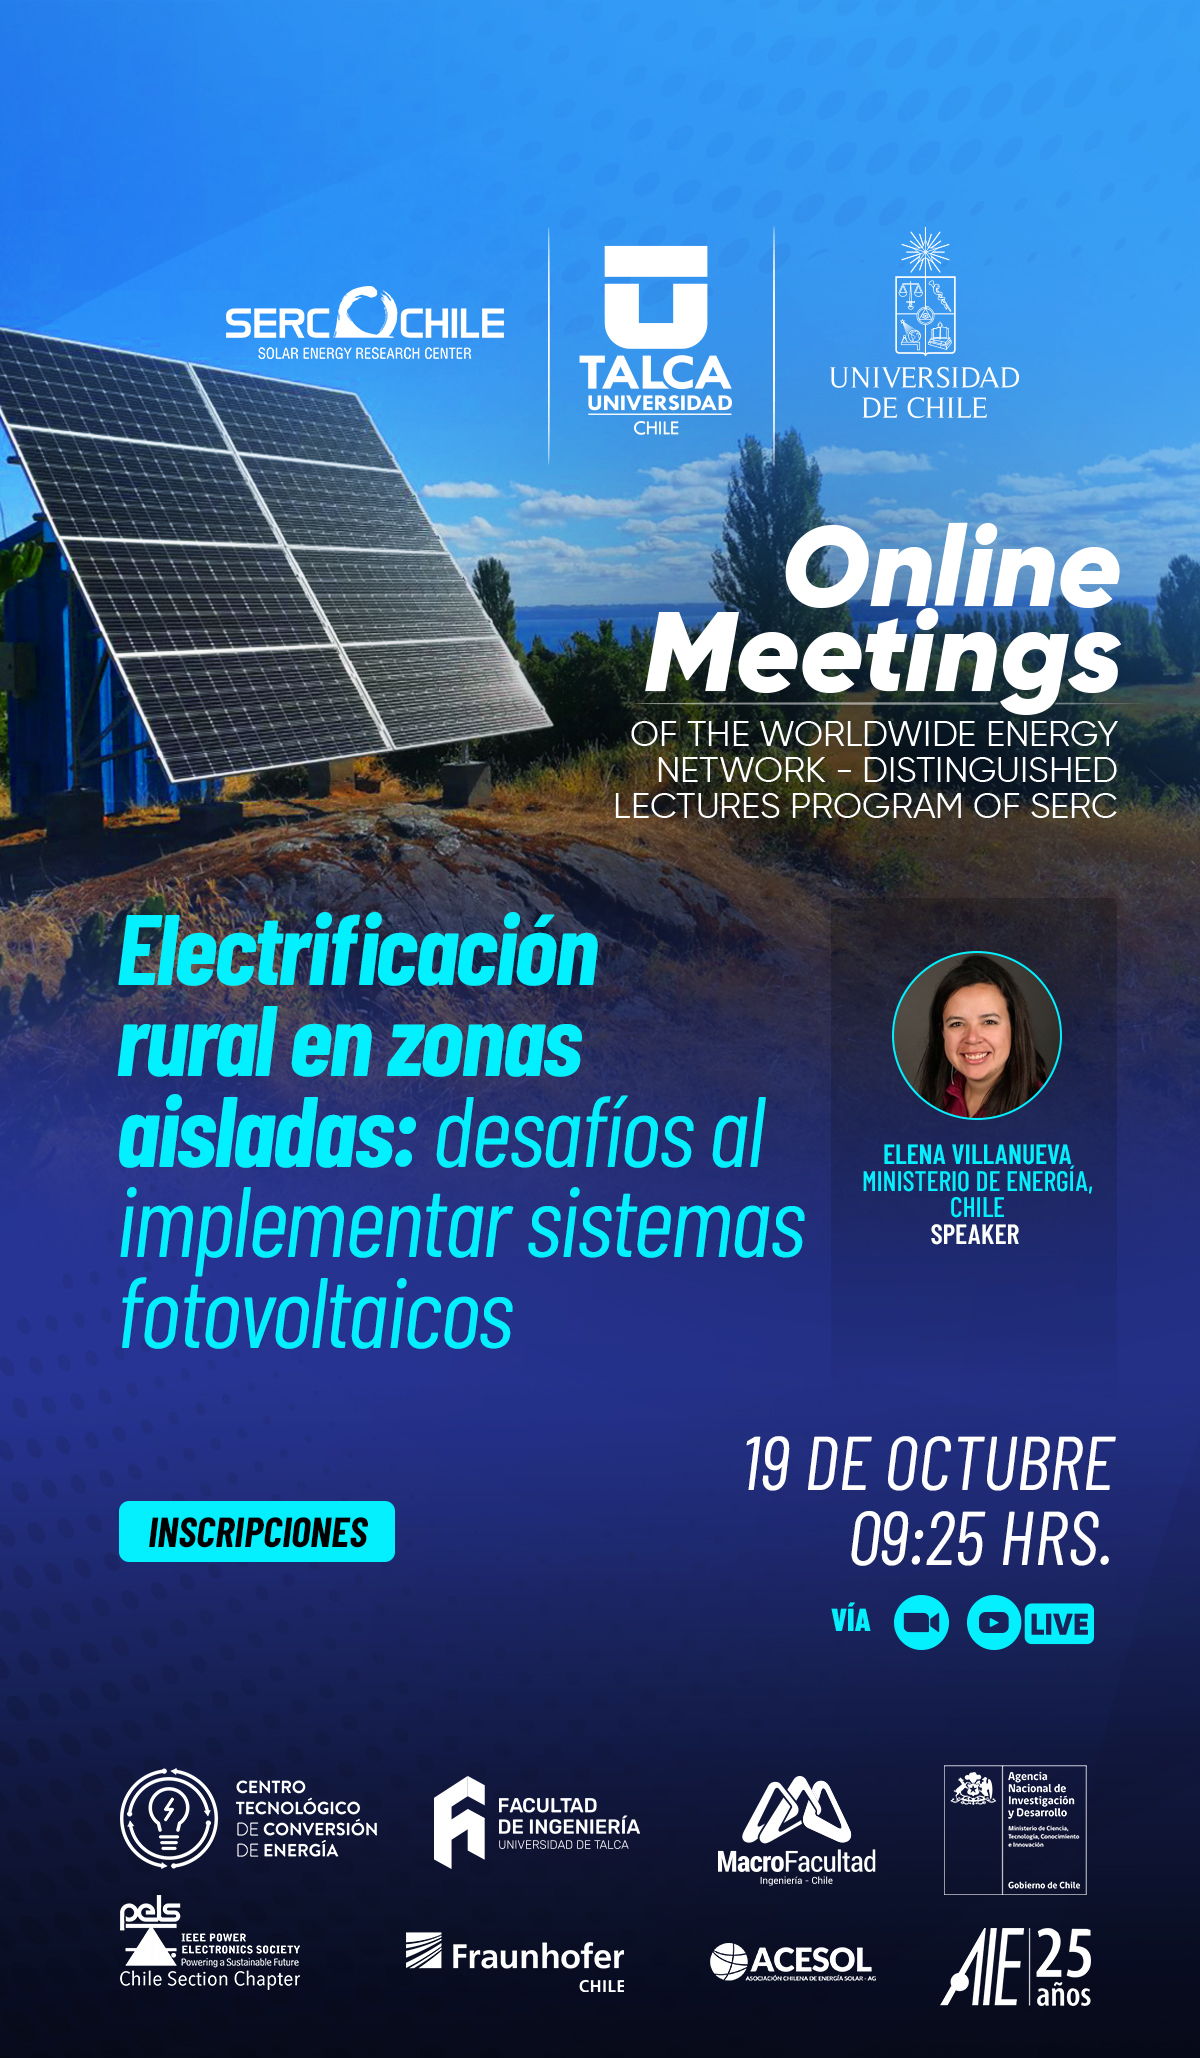 Session 10 – Online Meetings of the Worldwide Energy NEtwoRk – Distinguished Lectures Program of SERC